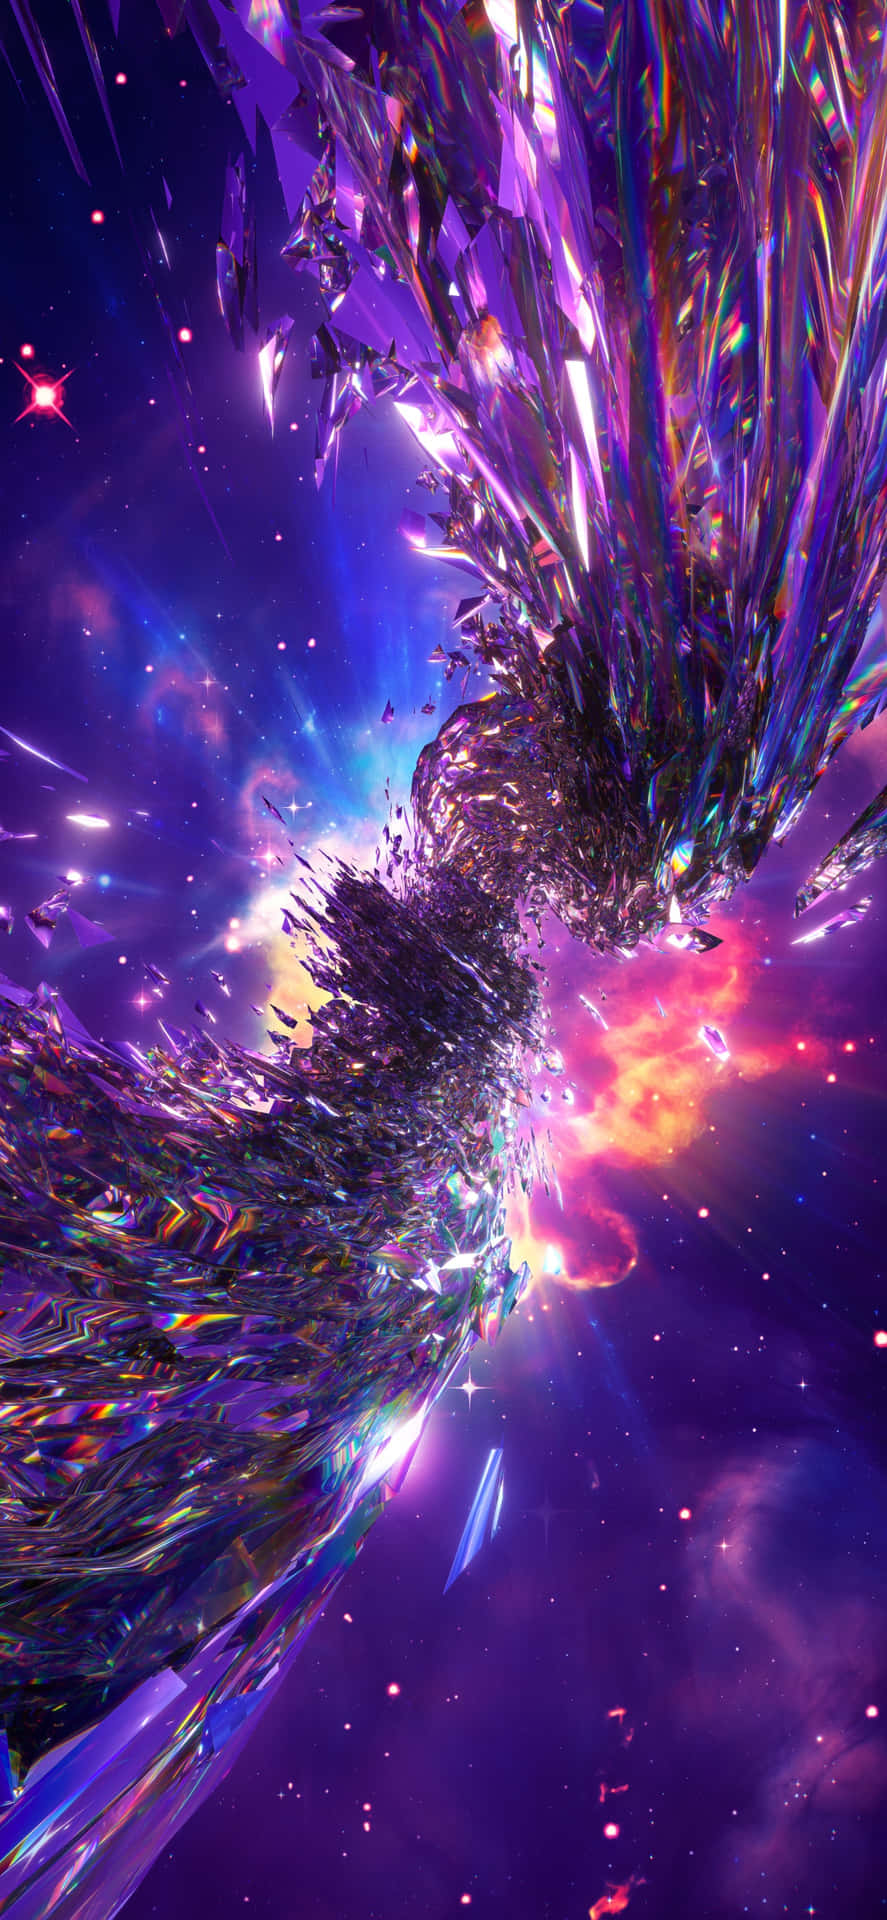 "Exploring an Extraordinary Psychedelic Space" Wallpaper